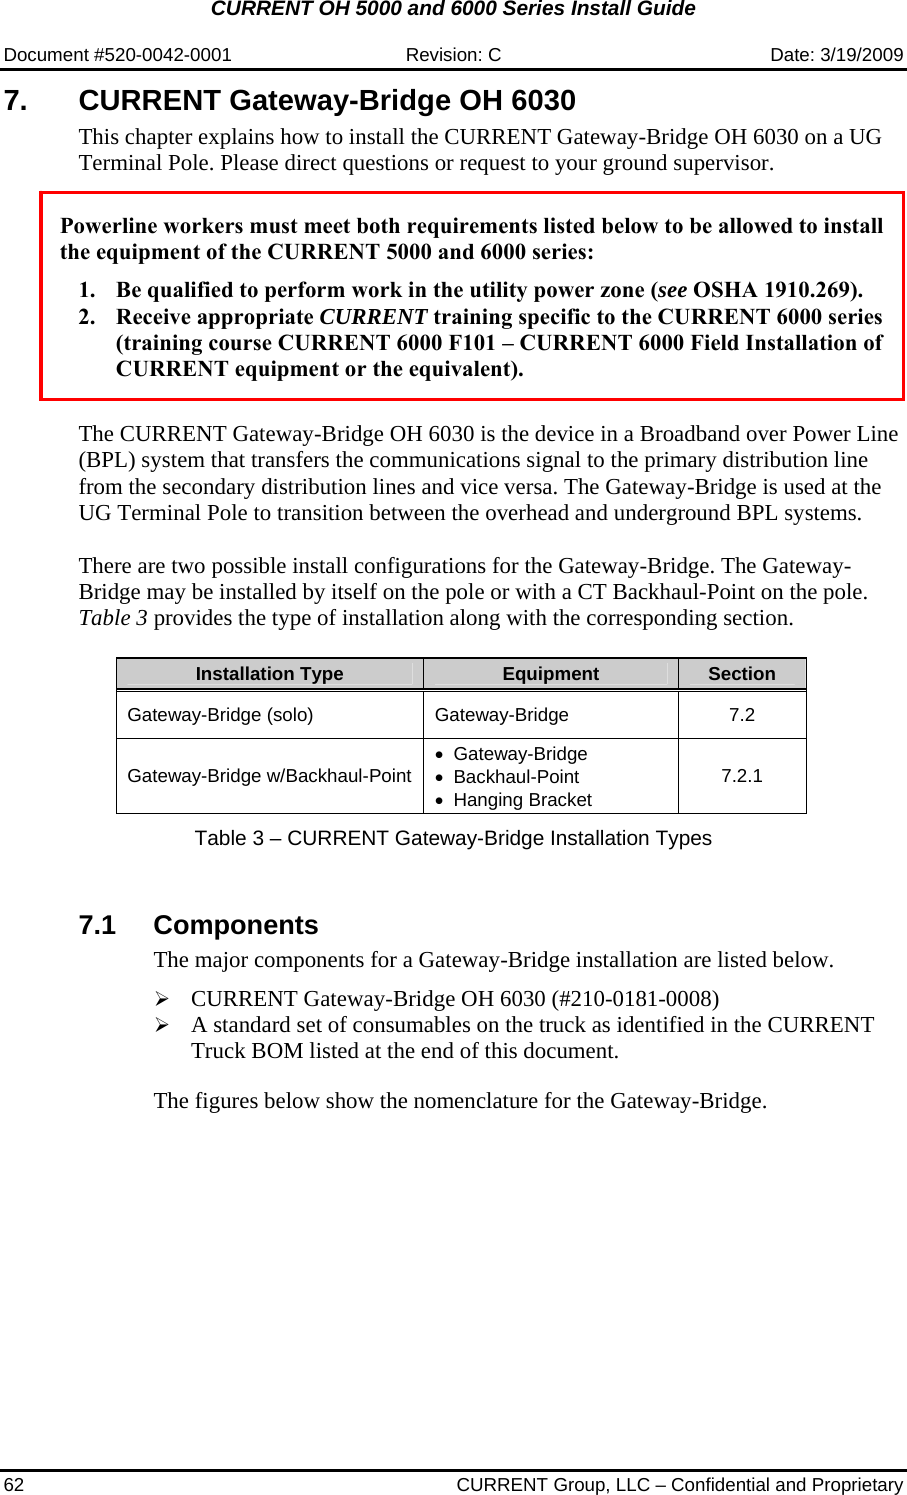 CURRENT OH 5000 and 6000 Series Install Guide  Document #520-0042-0001  Revision: C  Date: 3/19/2009 62  CURRENT Group, LLC – Confidential and Proprietary 7.  CURRENT Gateway-Bridge OH 6030 This chapter explains how to install the CURRENT Gateway-Bridge OH 6030 on a UG Terminal Pole. Please direct questions or request to your ground supervisor.   Powerline workers must meet both requirements listed below to be allowed to install the equipment of the CURRENT 5000 and 6000 series:  1. Be qualified to perform work in the utility power zone (see OSHA 1910.269). 2. Receive appropriate CURRENT training specific to the CURRENT 6000 series (training course CURRENT 6000 F101 – CURRENT 6000 Field Installation of CURRENT equipment or the equivalent).   The CURRENT Gateway-Bridge OH 6030 is the device in a Broadband over Power Line (BPL) system that transfers the communications signal to the primary distribution line from the secondary distribution lines and vice versa. The Gateway-Bridge is used at the UG Terminal Pole to transition between the overhead and underground BPL systems.  There are two possible install configurations for the Gateway-Bridge. The Gateway-Bridge may be installed by itself on the pole or with a CT Backhaul-Point on the pole. Table 3 provides the type of installation along with the corresponding section.  Installation Type  Equipment  Section  Gateway-Bridge (solo)  Gateway-Bridge  7.2 Gateway-Bridge w/Backhaul-Point • Gateway-Bridge • Backhaul-Point • Hanging Bracket 7.2.1  Table 3 – CURRENT Gateway-Bridge Installation Types   7.1 Components The major components for a Gateway-Bridge installation are listed below.  ¾ CURRENT Gateway-Bridge OH 6030 (#210-0181-0008) ¾ A standard set of consumables on the truck as identified in the CURRENT Truck BOM listed at the end of this document.    The figures below show the nomenclature for the Gateway-Bridge.  